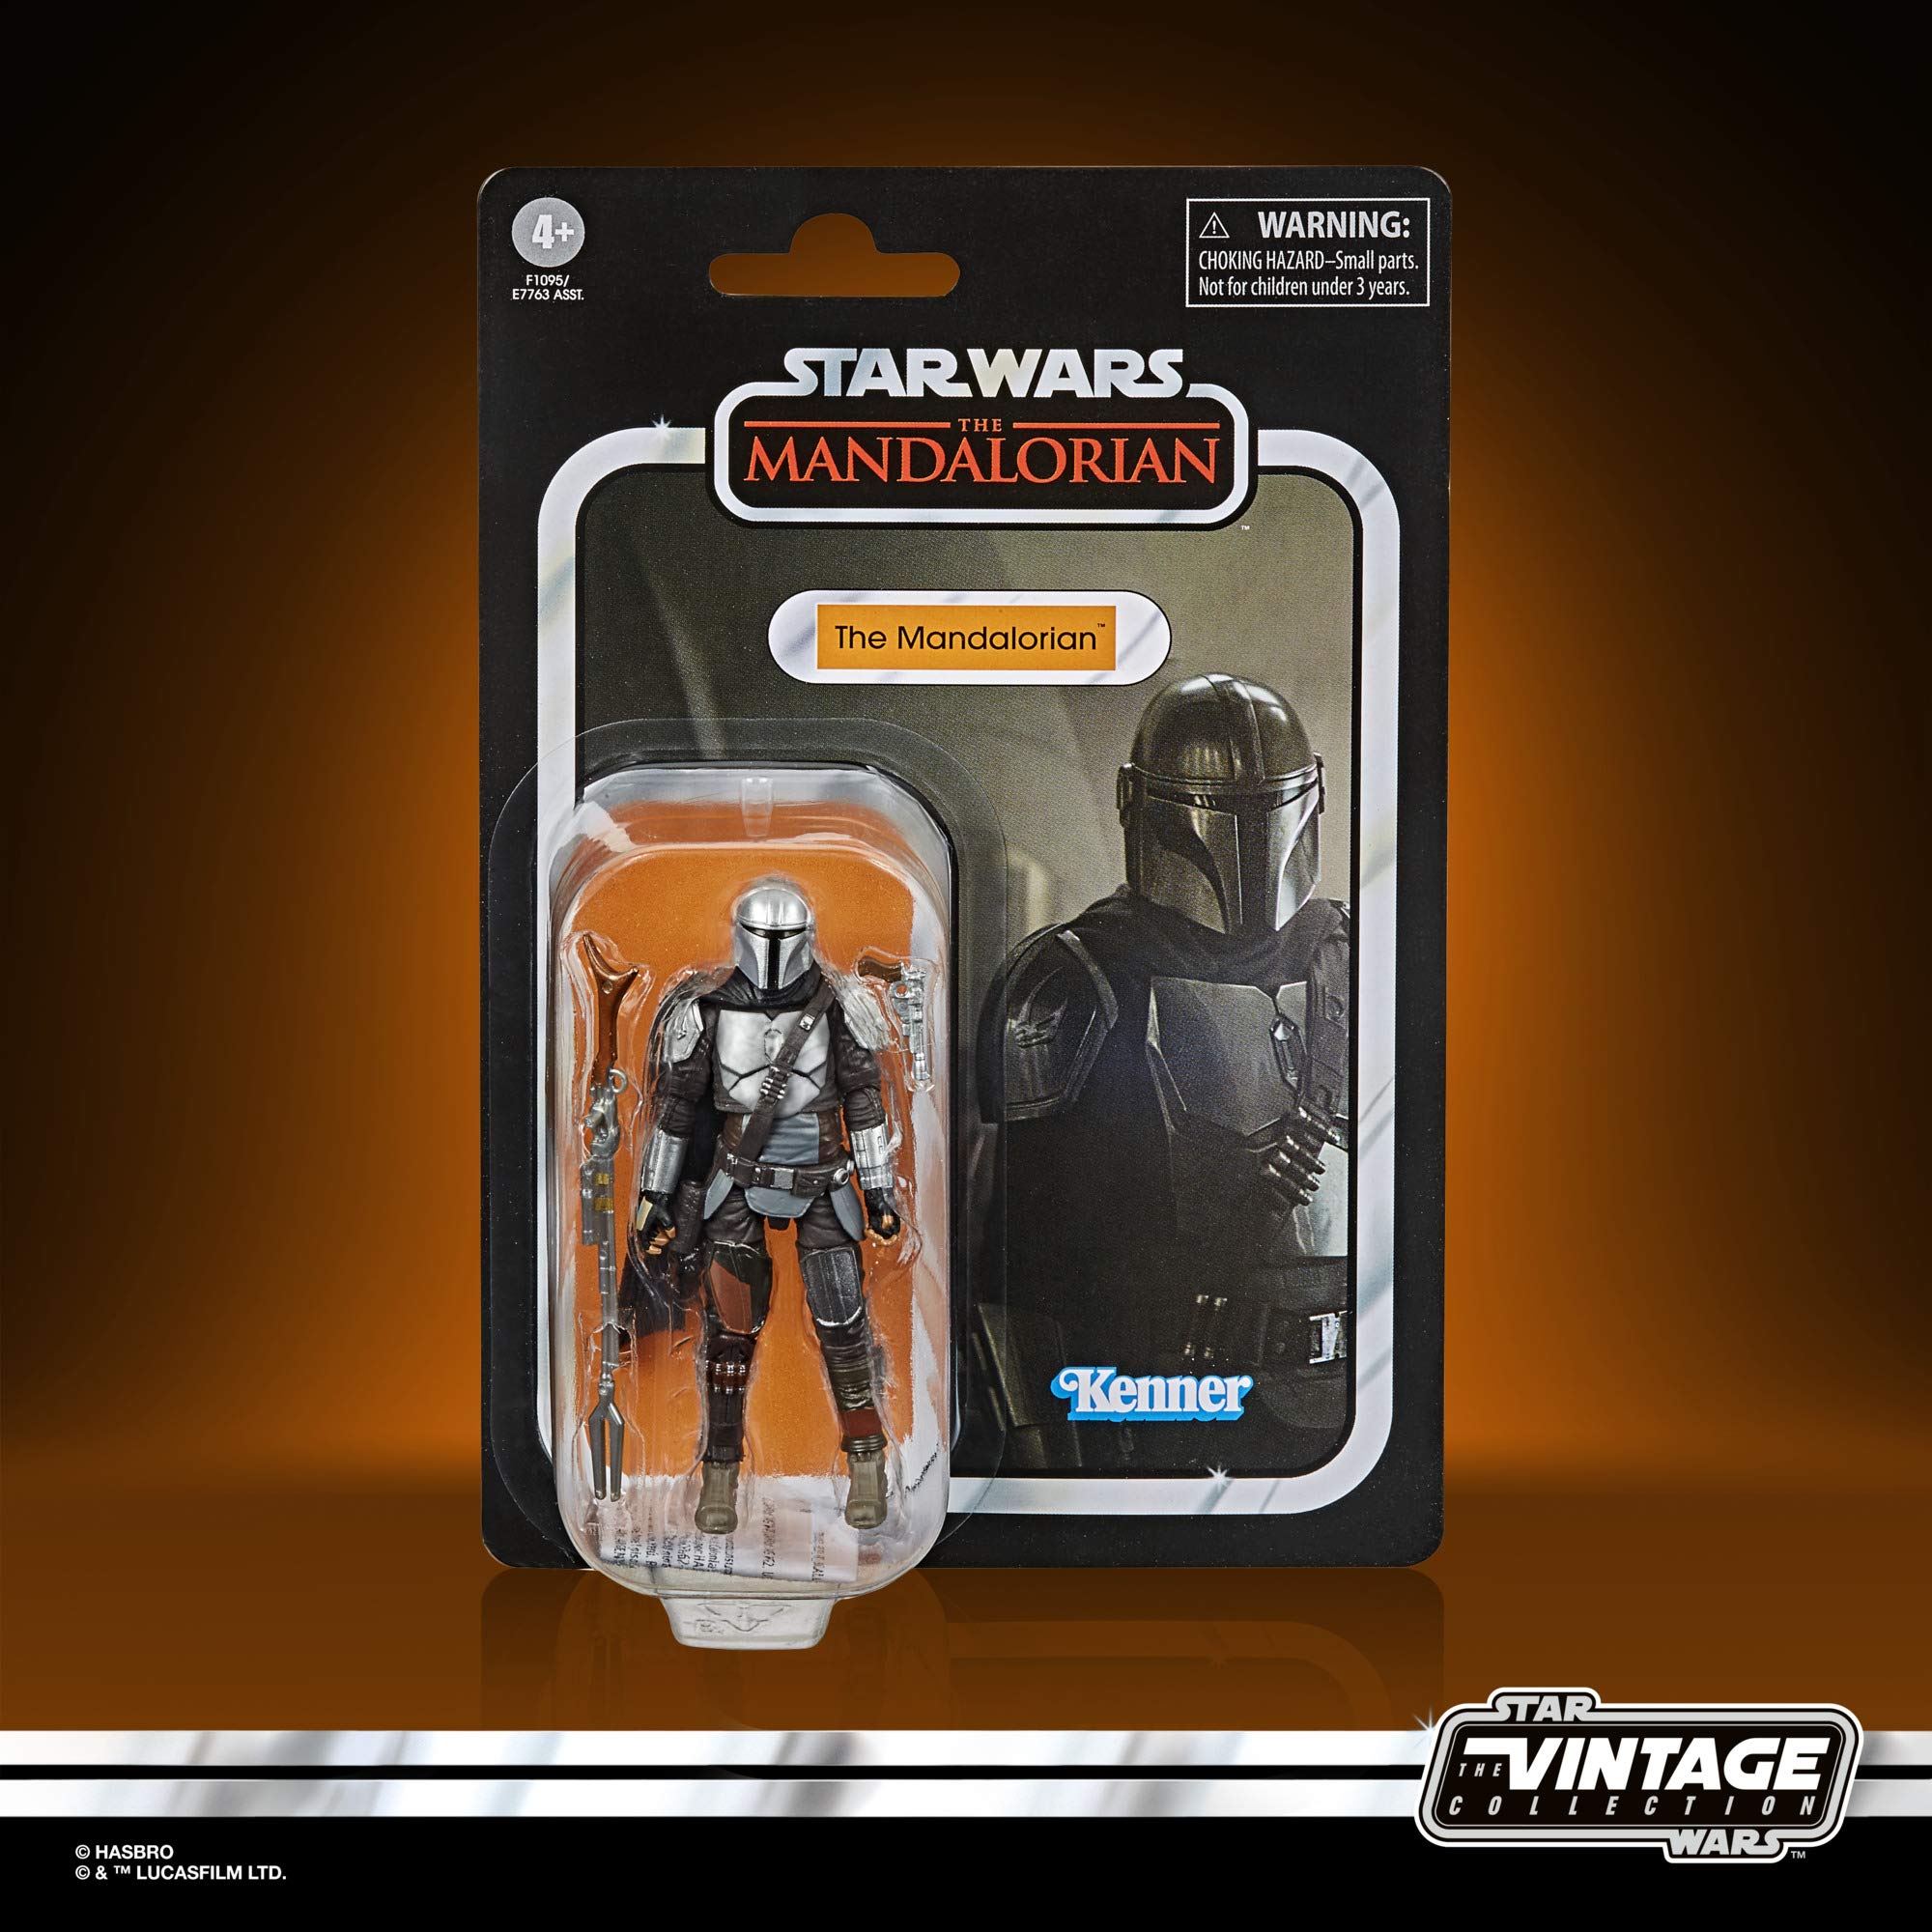 STAR WARS The Vintage Collection The Mandalorian Toy, 3.75-Inch-Scale The Mandalorian Action Figure, Toys for Kids Ages 4 and Up